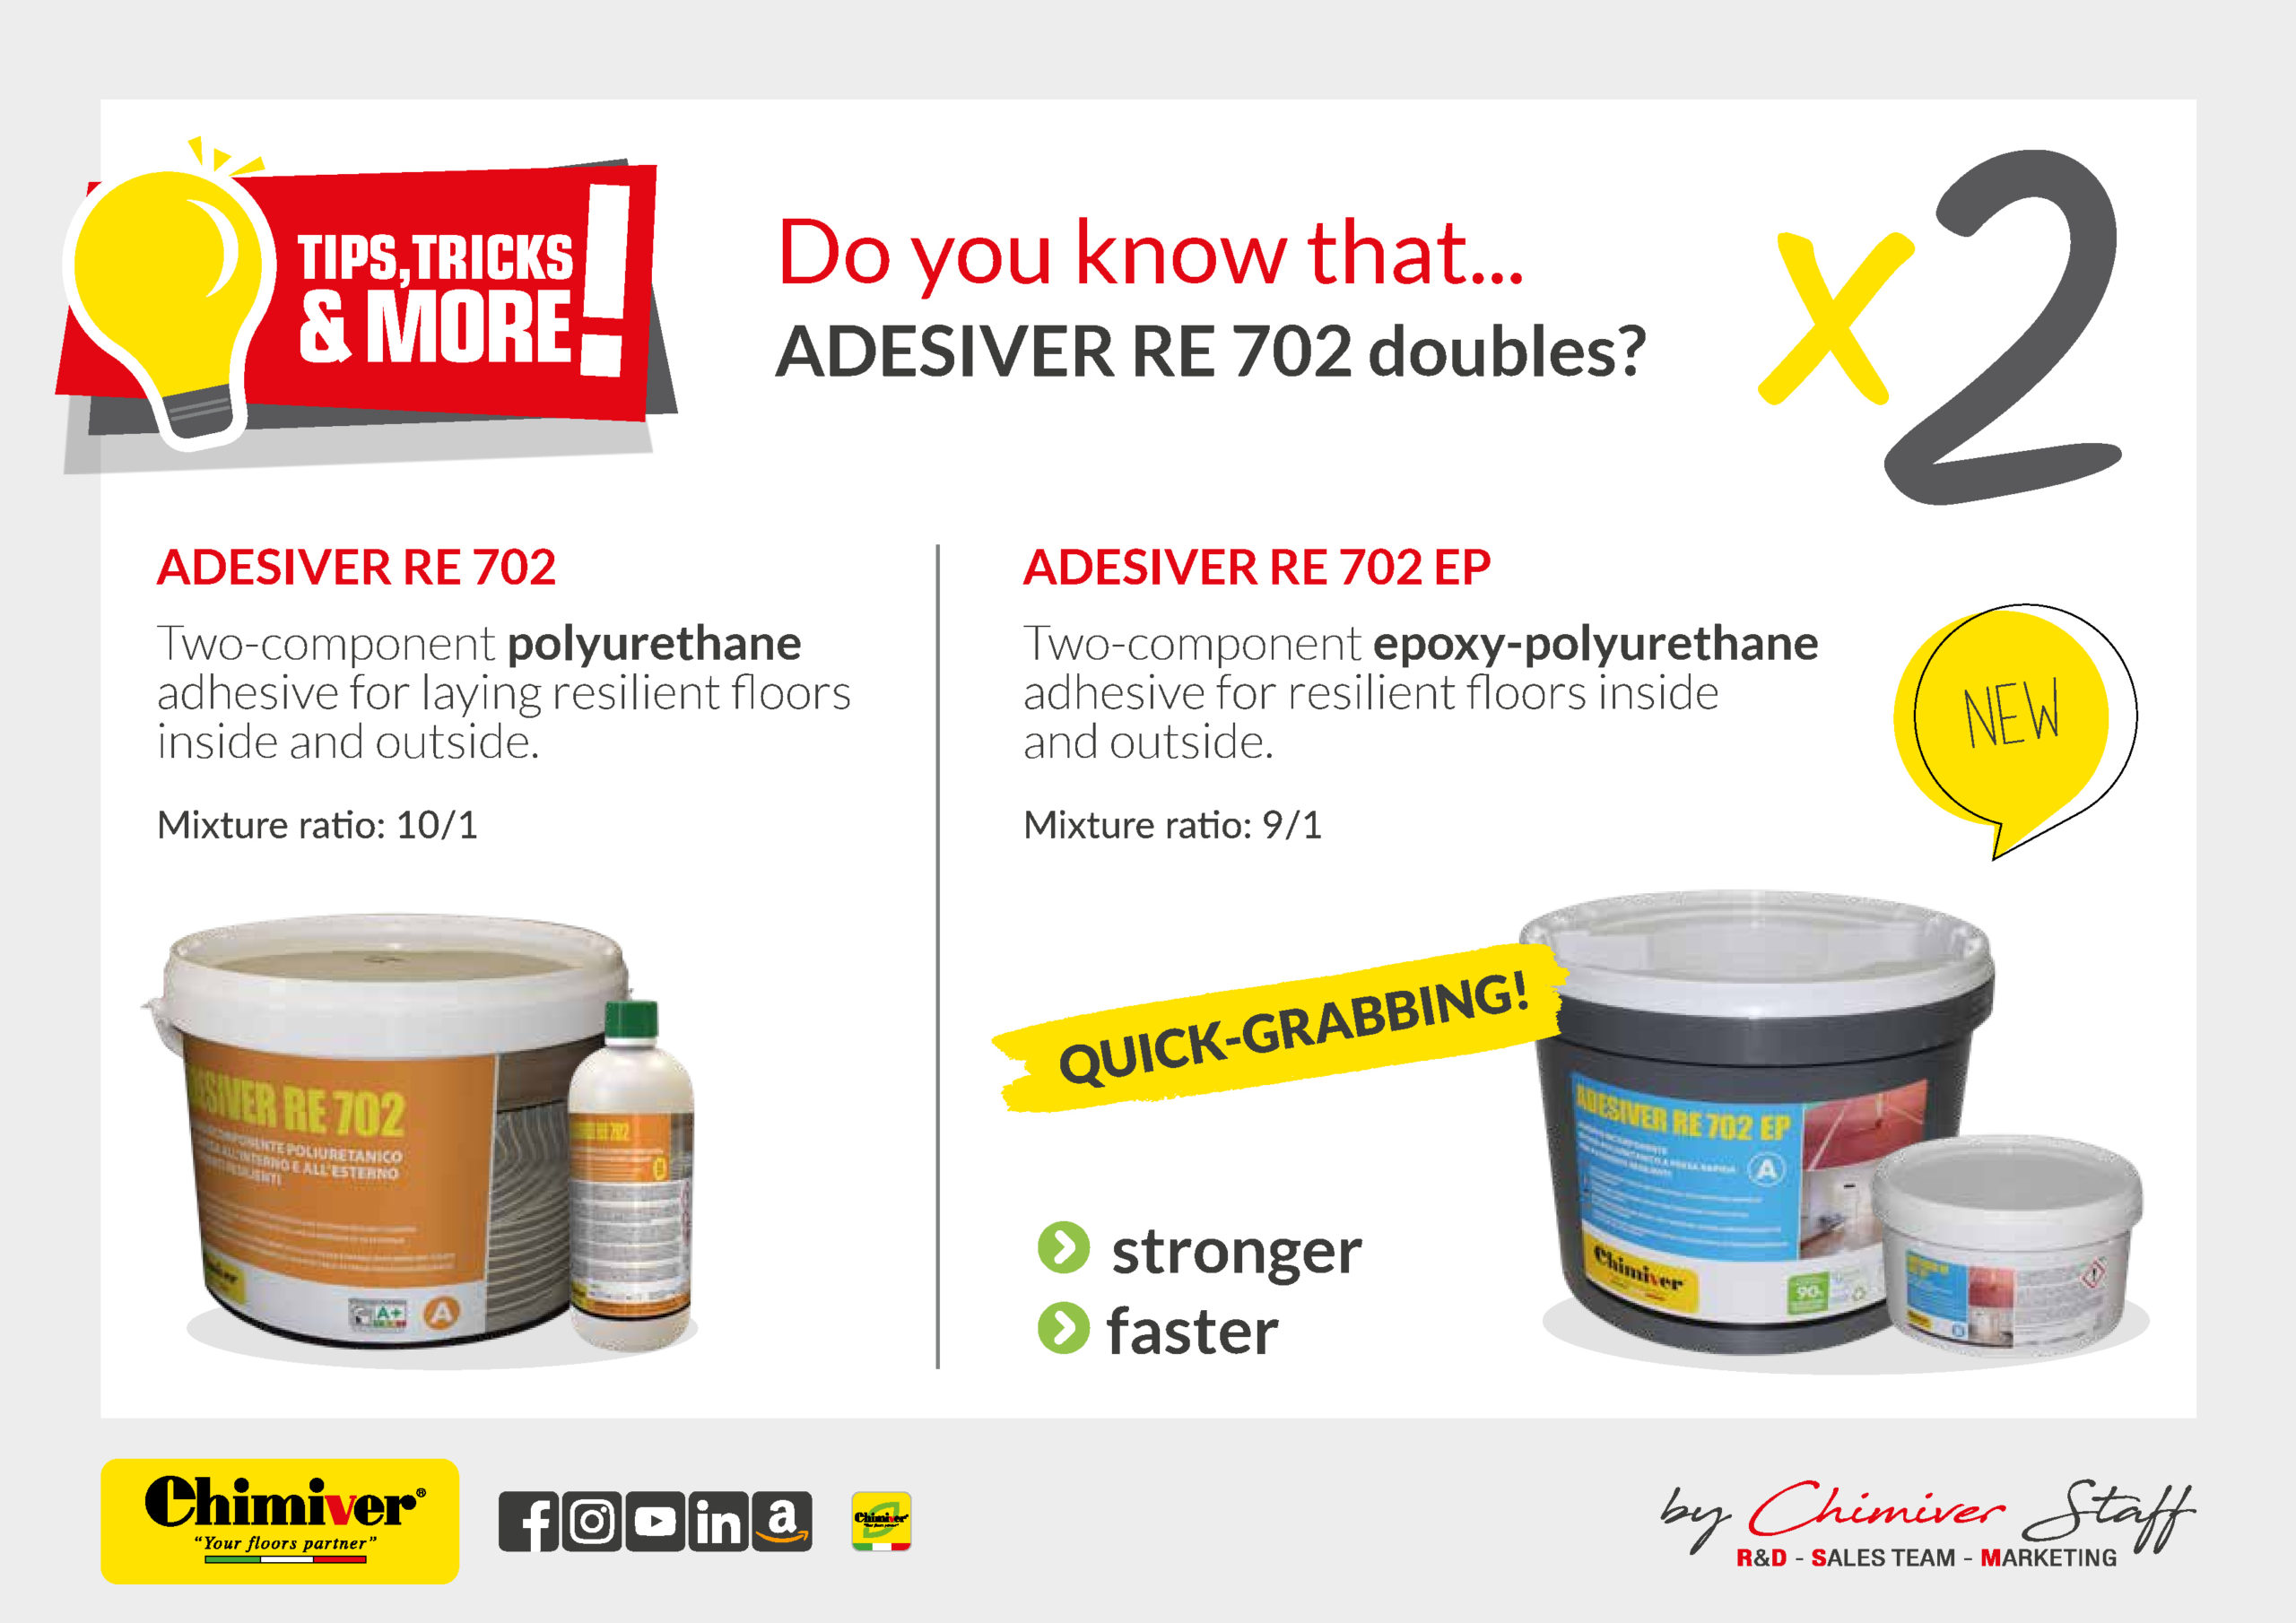 ADESIVER RE 702 EP: a new adhesive for laying resilient floors